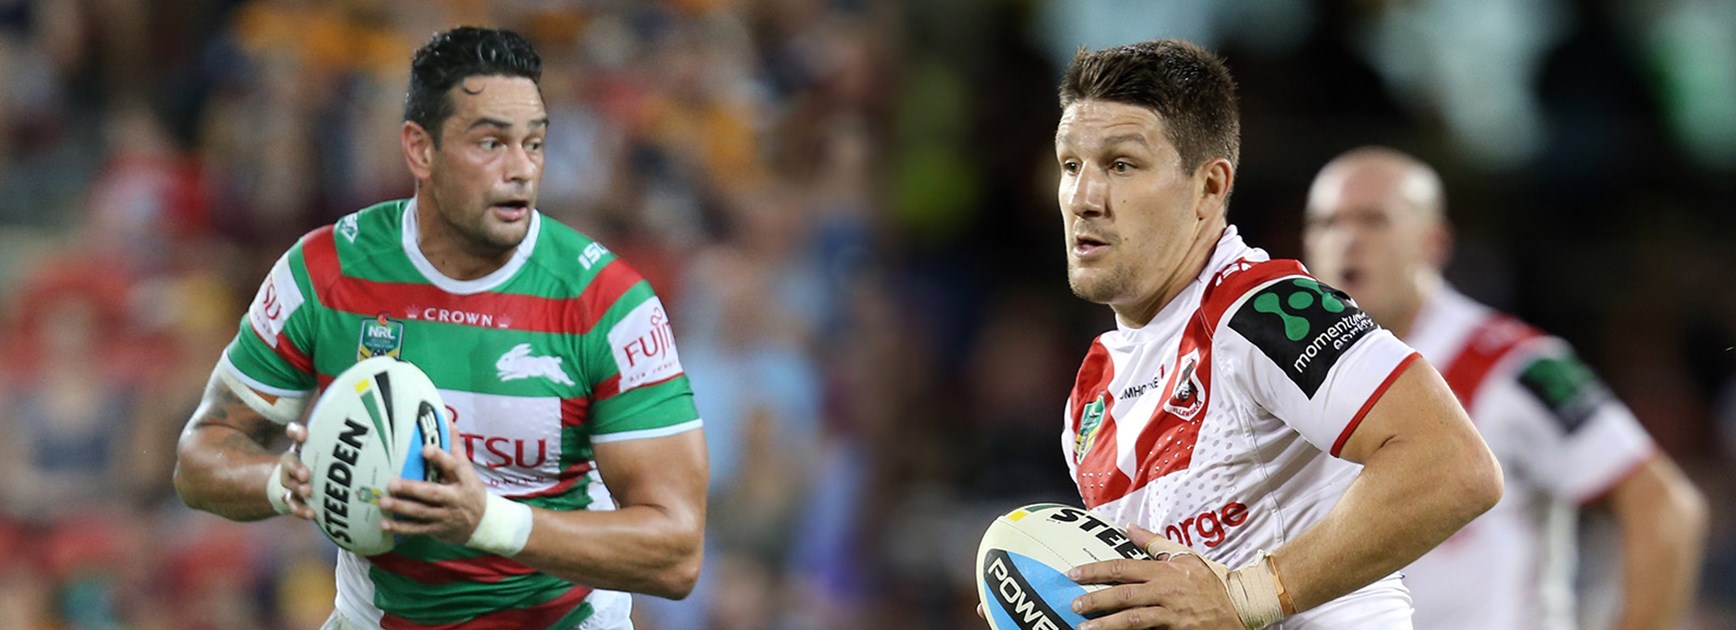 South Sydney's John Sutton and St George Illawarra's Gareth Widdop will be looking to lead their team to victory in Round 9.